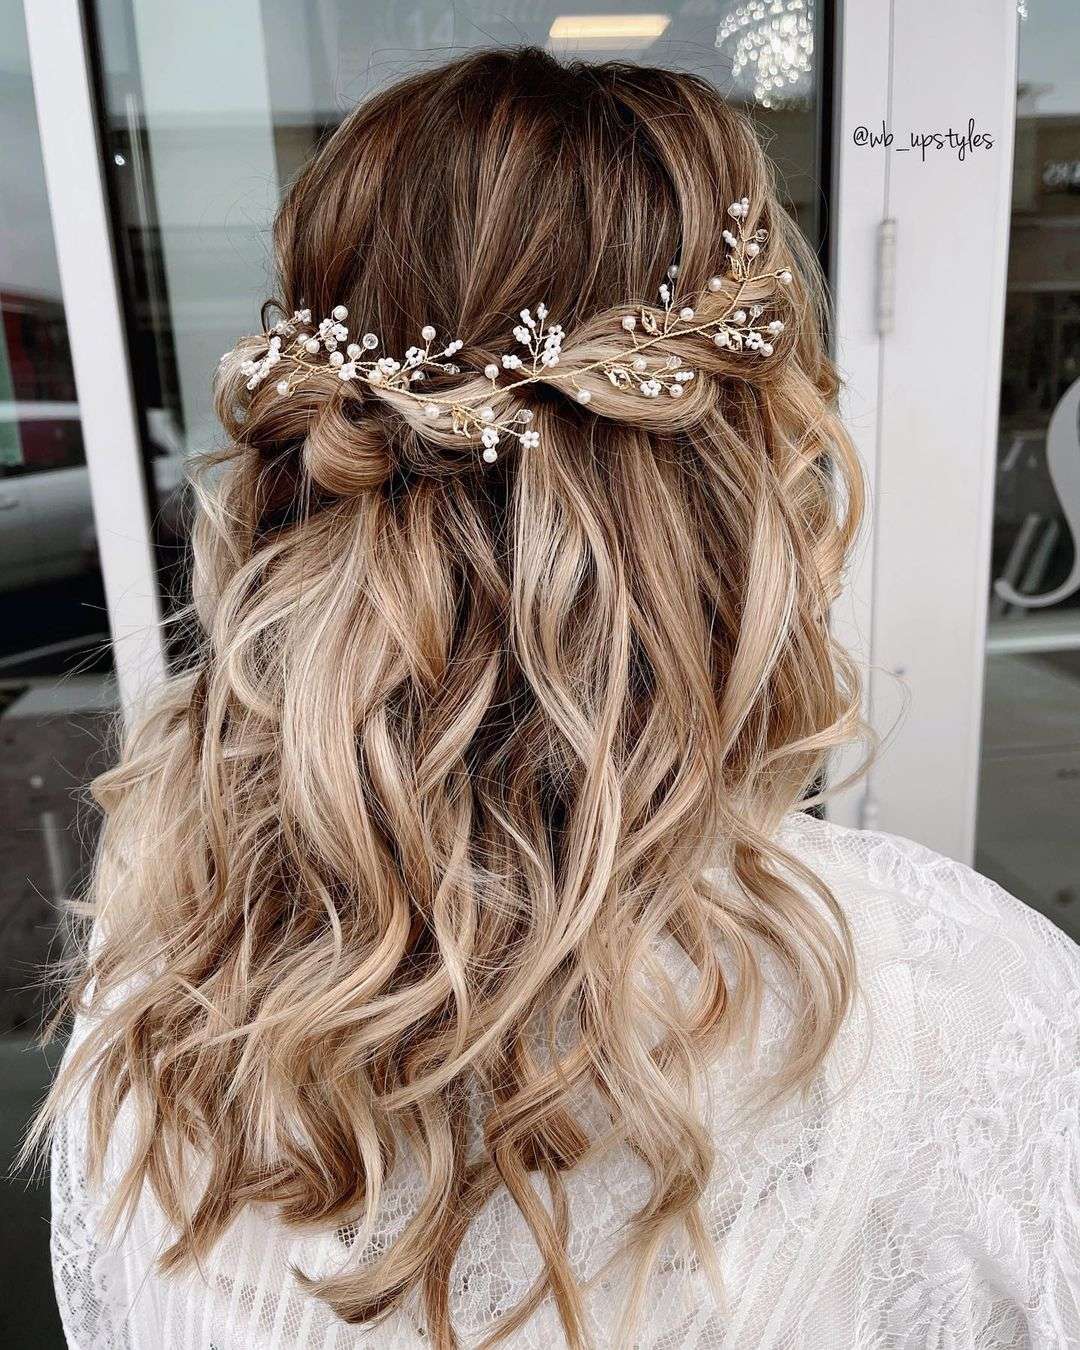 20 Best Medium Length Prom Hairstyles for a Perfect Night